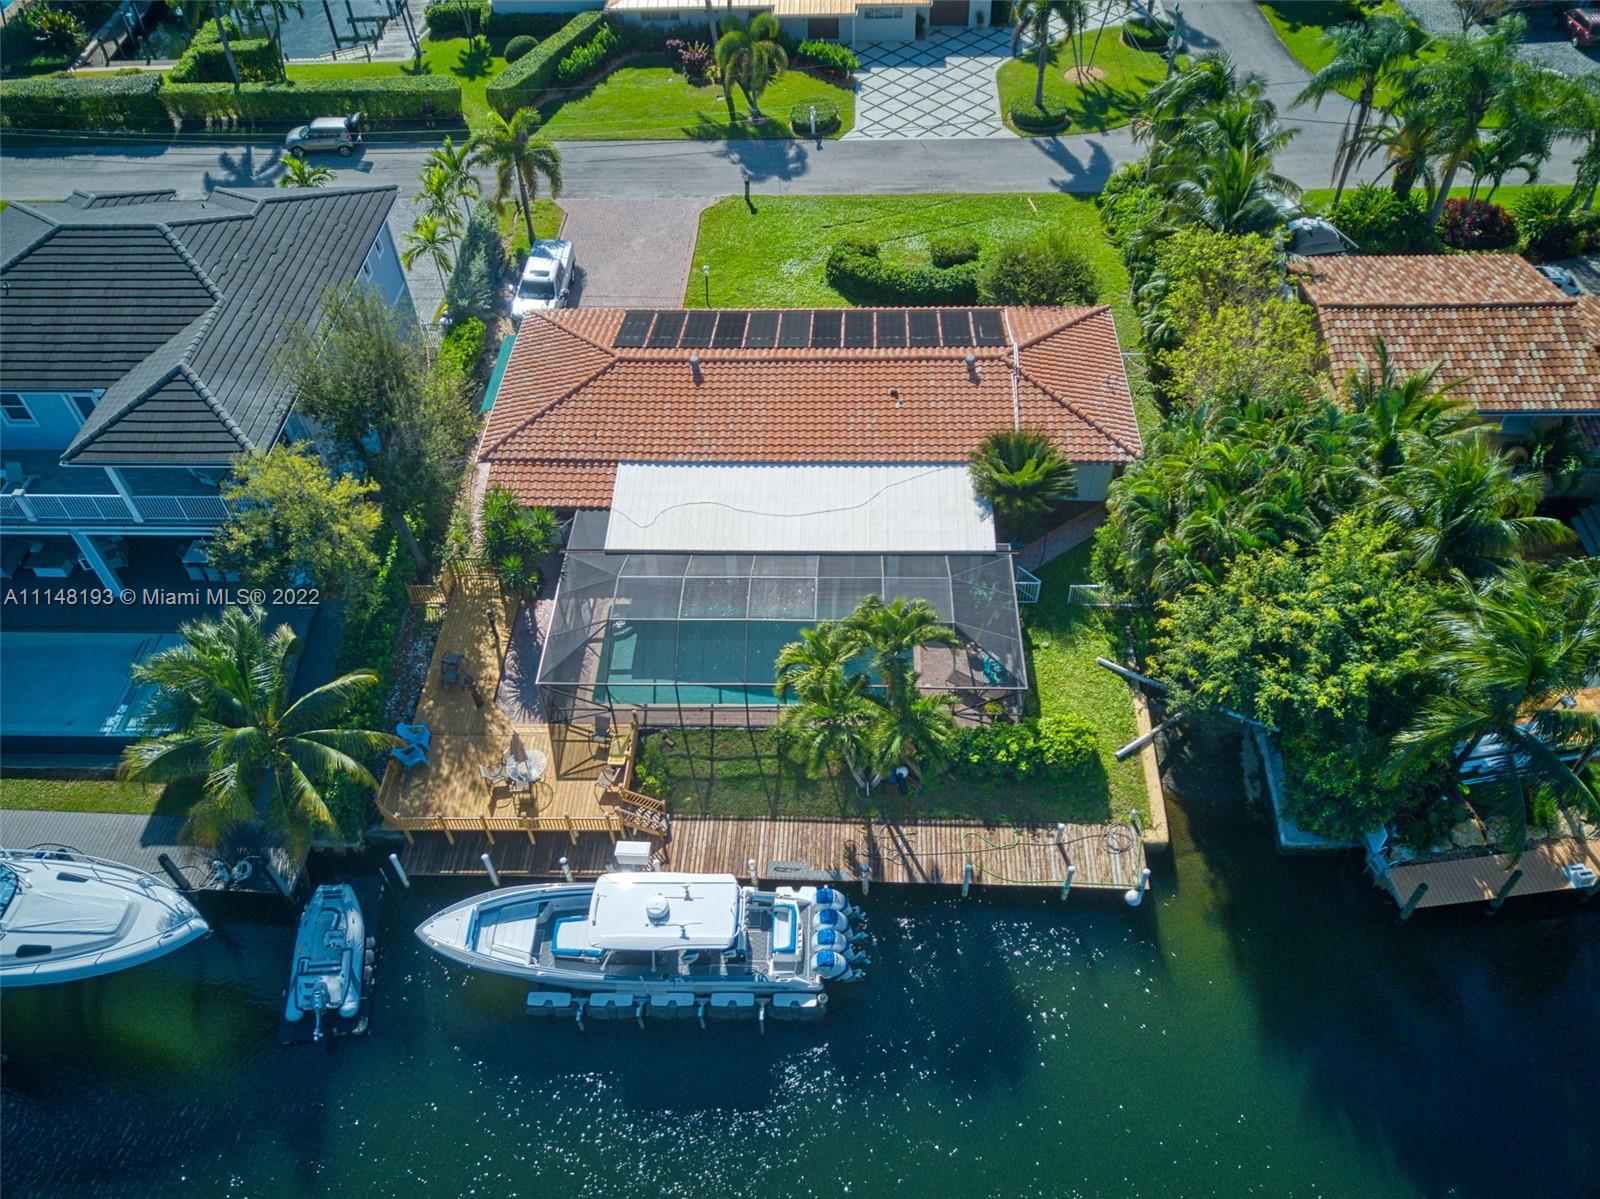 Unbelievable waterfront property with NO FIXED BRIDGES only 4 lots off the Intercostal. Deep canal, 100' waterfront that will accommodate an 80' boat. 3 bedroom\3 bathroom\1 garage\screened patio\salt water pool\fenced backyard. Boat ramp on property. 
Homesite will easily accommodate a custom new construction estate with 4600 living sqft. The home can be sold with the approved plans.
Walking distance to restaurants. PRIME LOCATION.